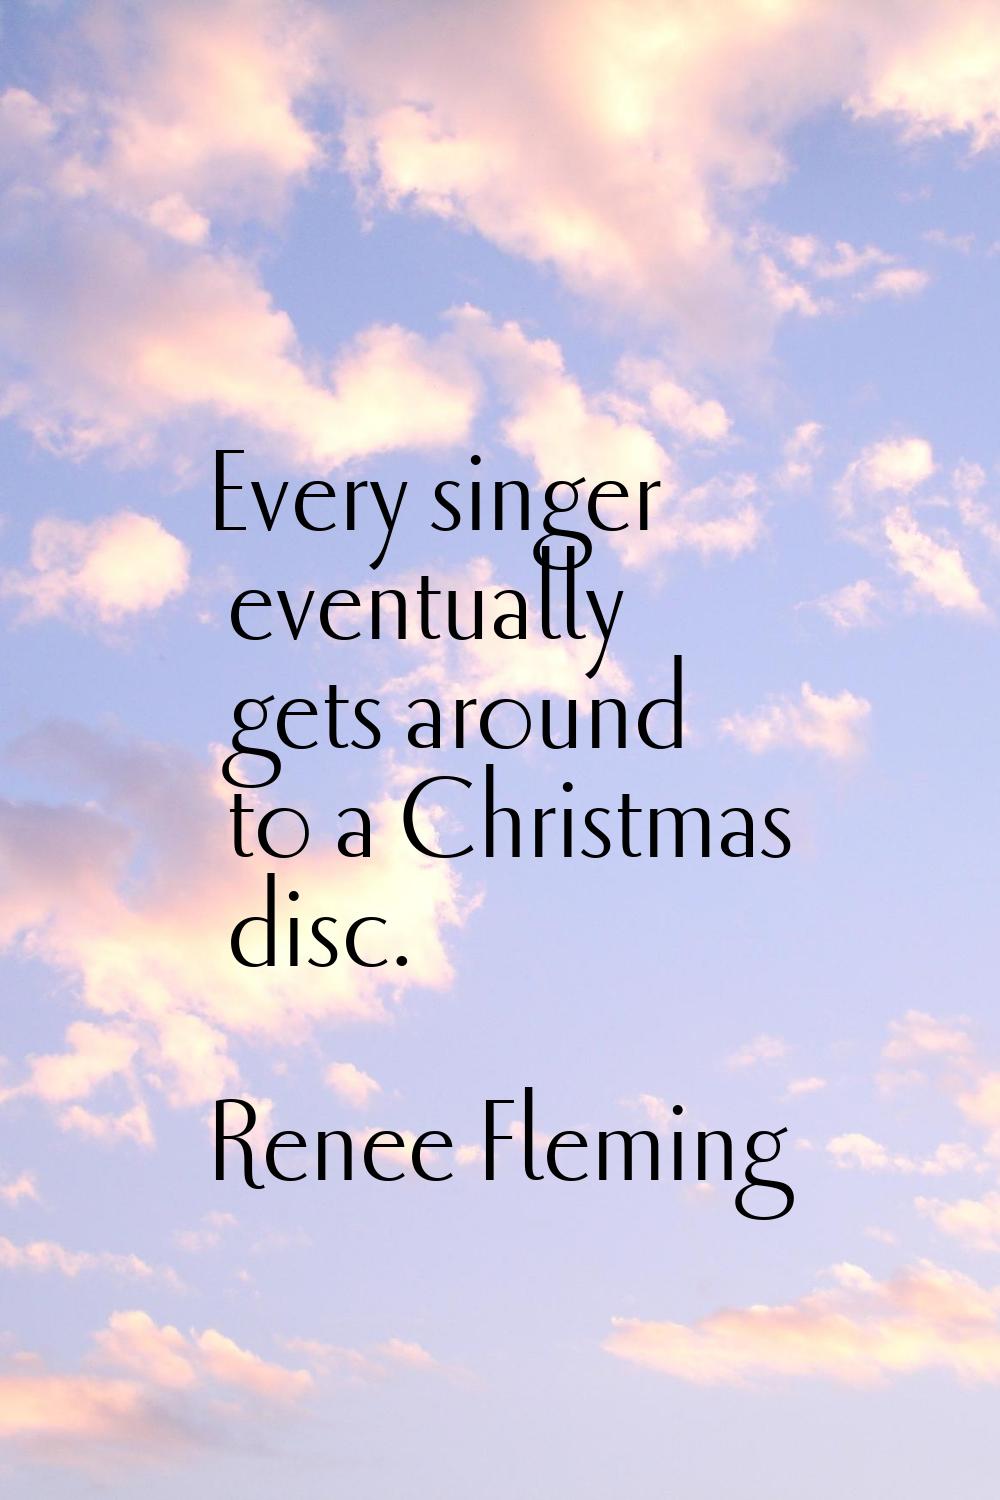 Every singer eventually gets around to a Christmas disc.